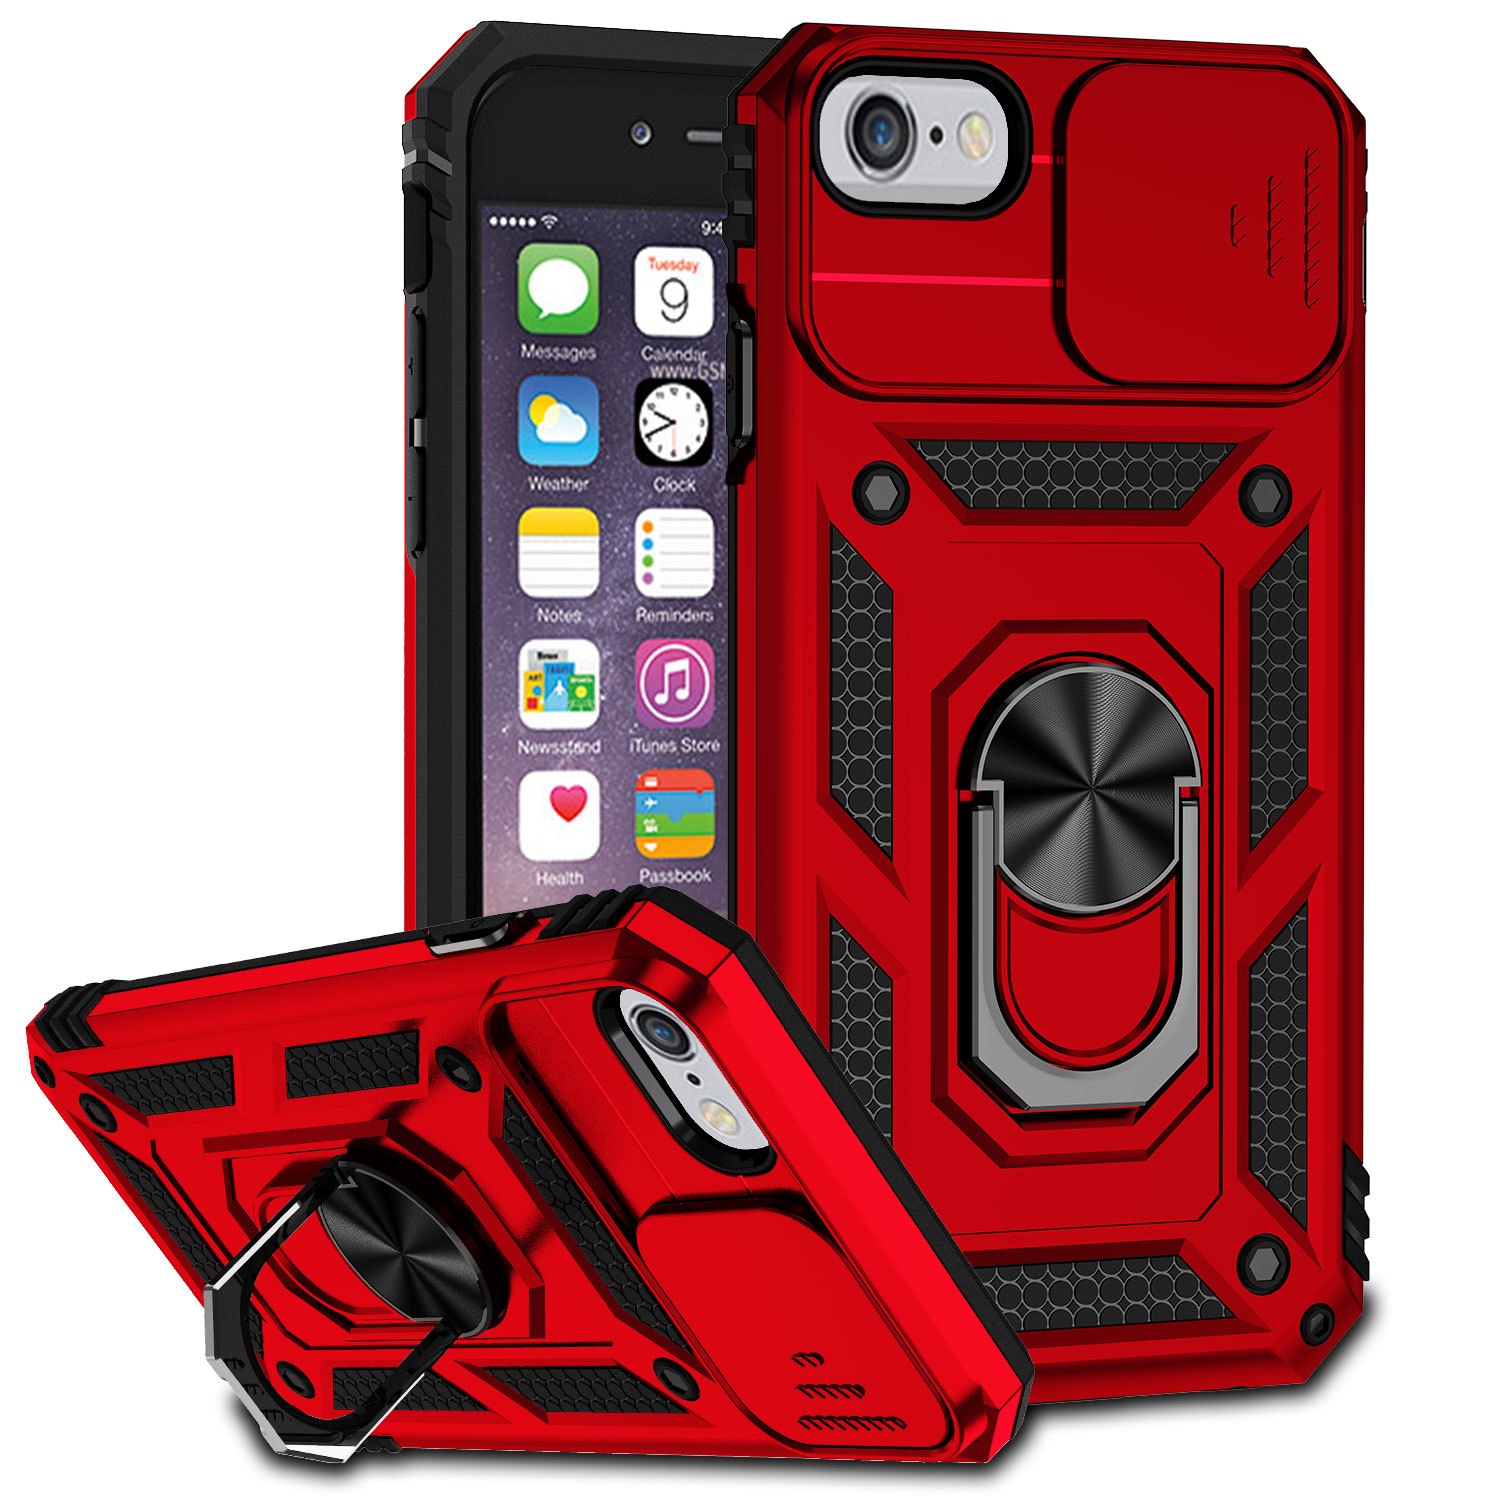 iPhone 6S Plus Cases  Protective Cases for iPhone 6S+